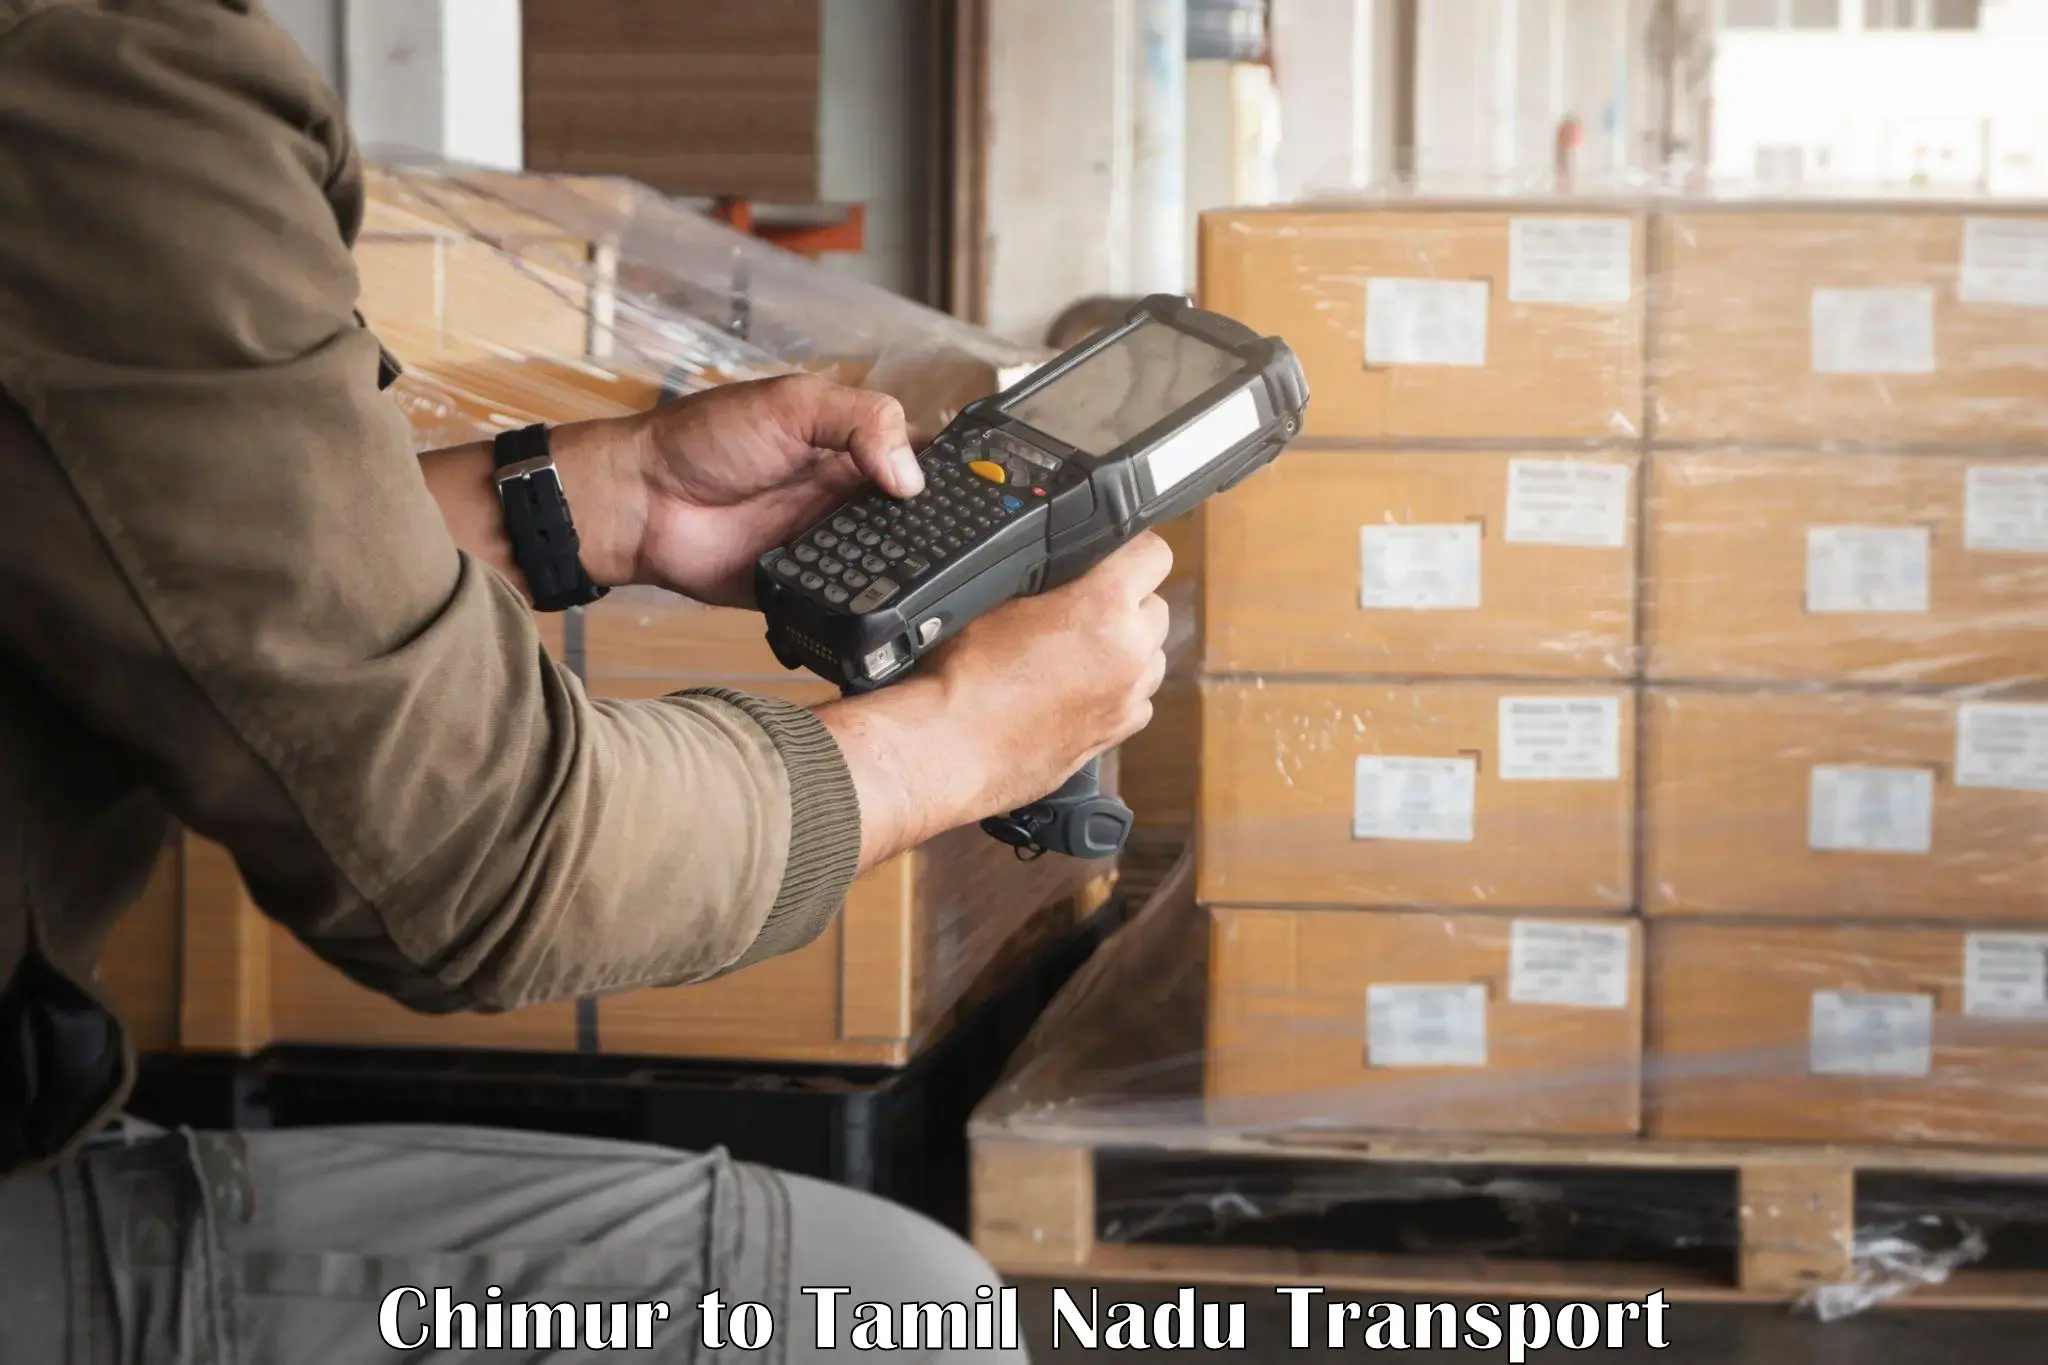 Goods delivery service Chimur to Tamil Nadu